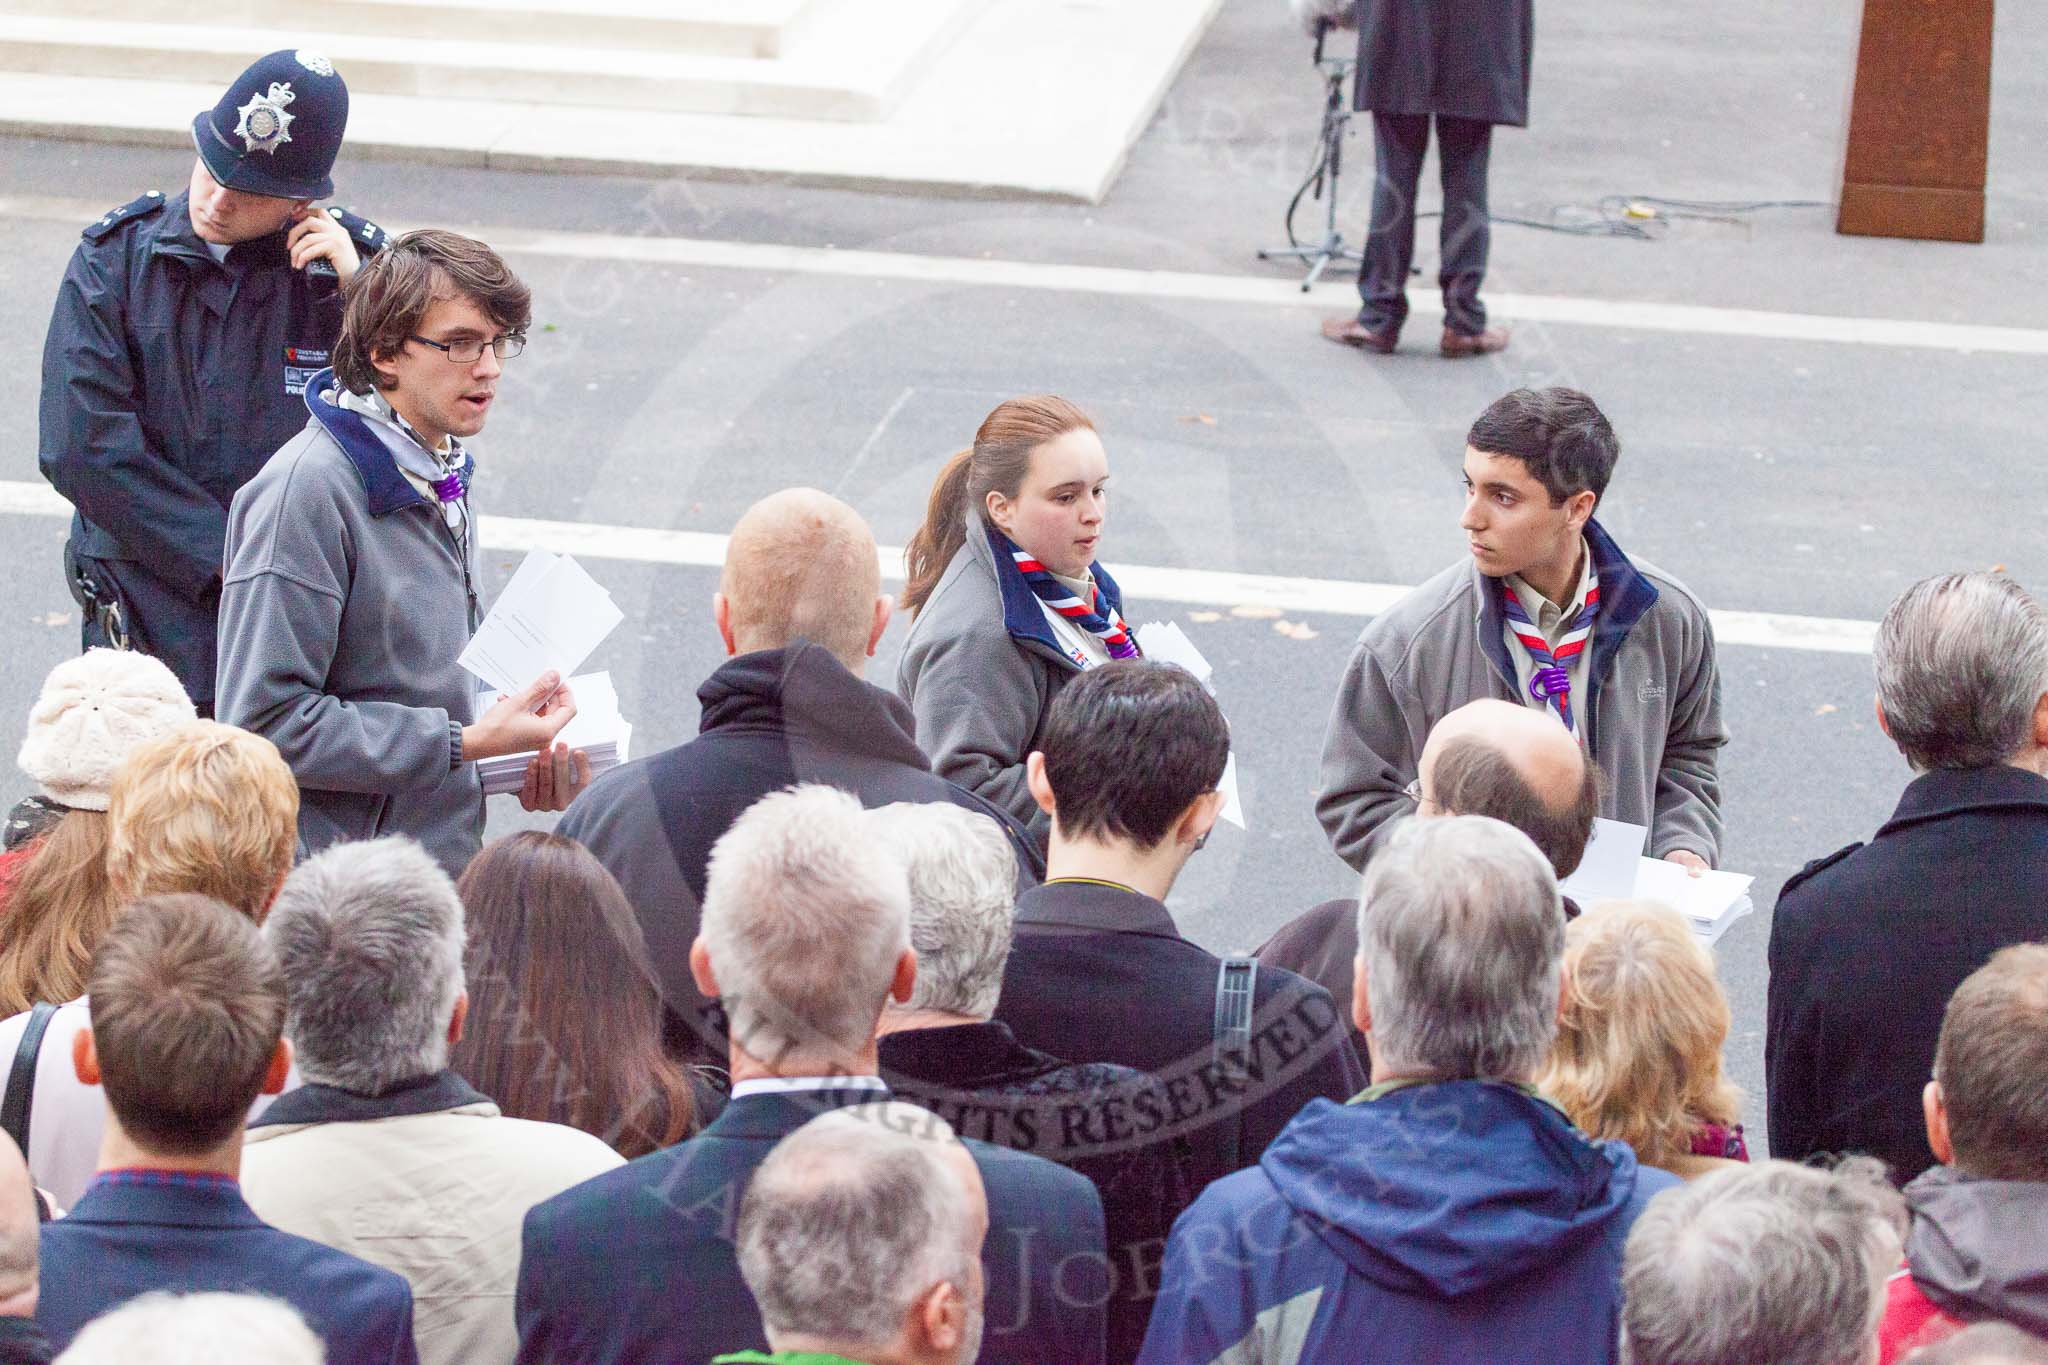 Remembrance Sunday at the Cenotaph 2015: Scouts distributing leaflets with information about the service. Image #12, 08 November 2015 09:18 Whitehall, London, UK